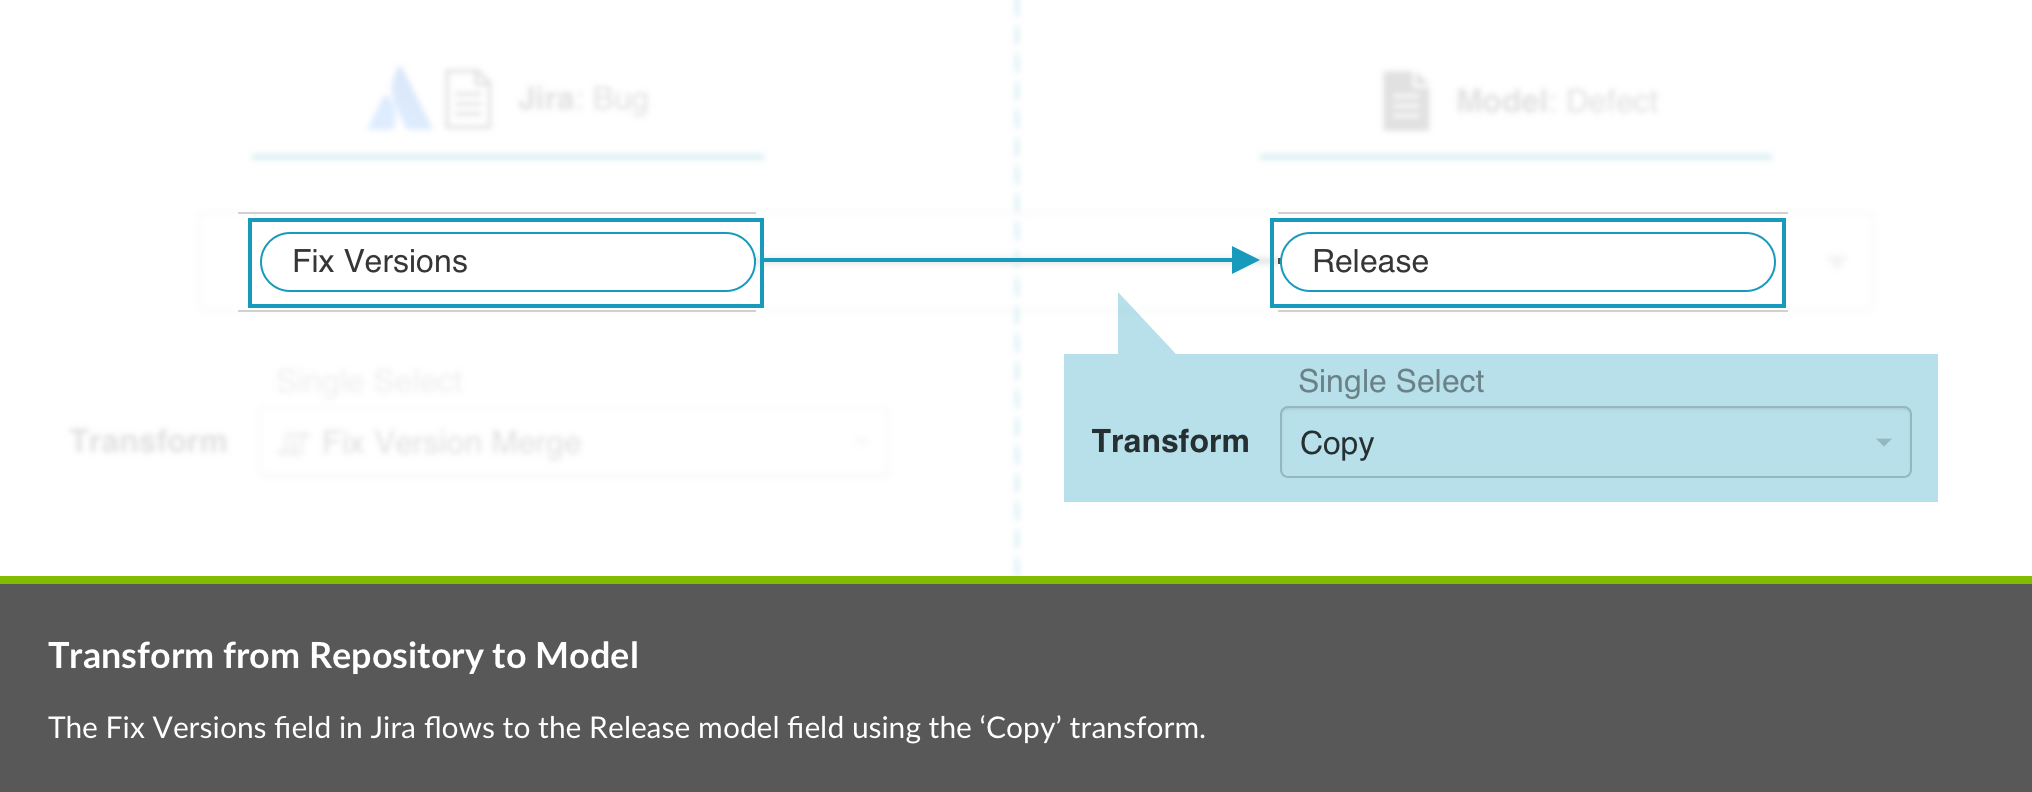 Transform-from-Repo-to-Model.png